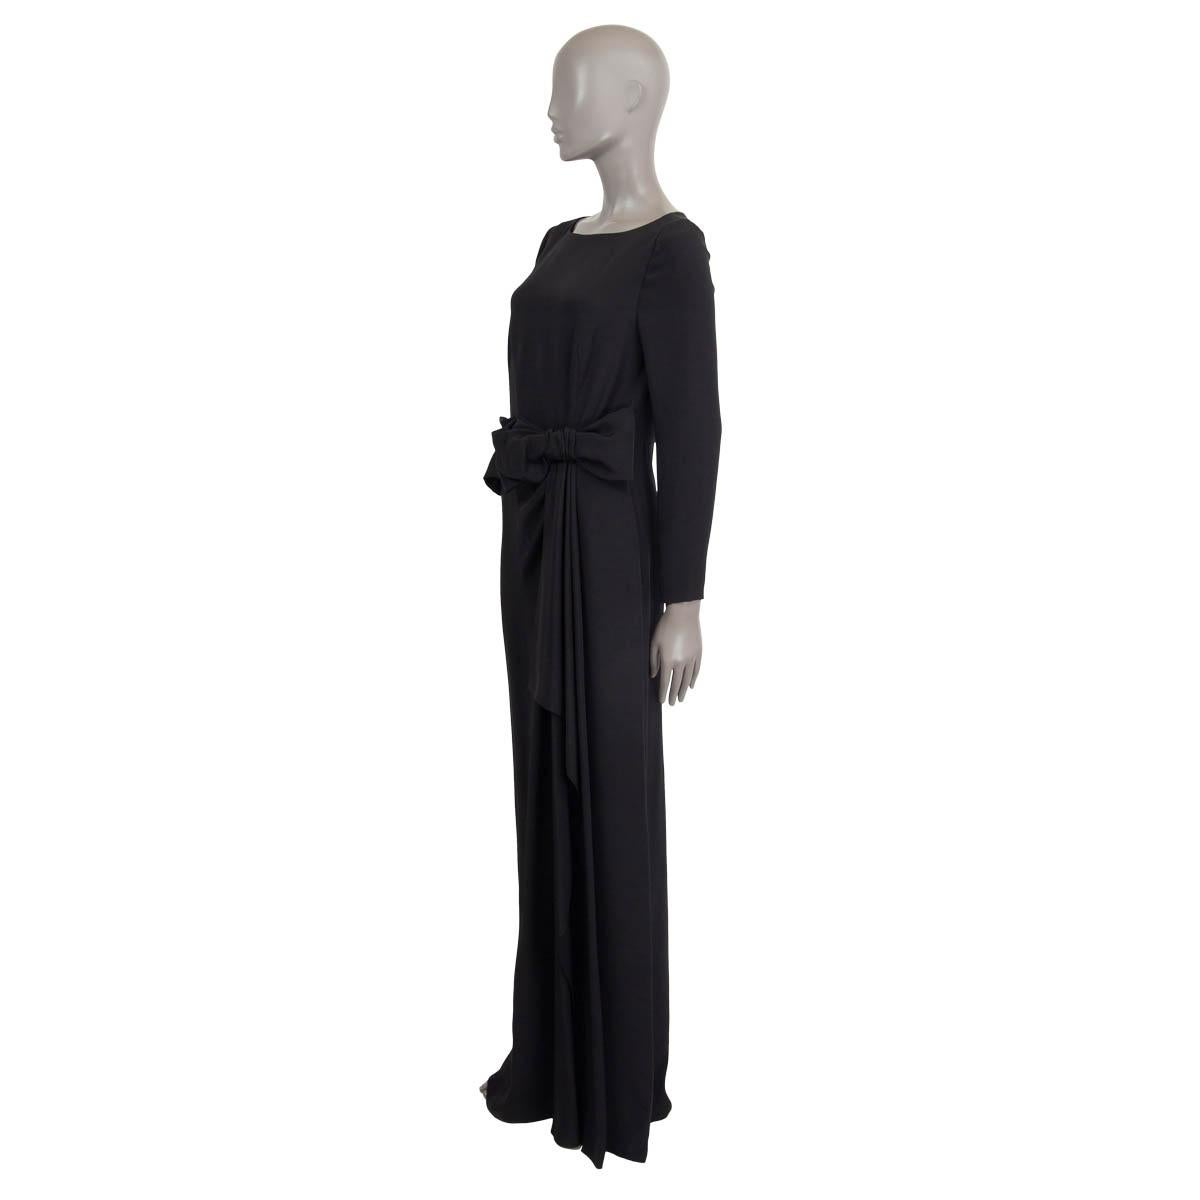 100% authentic Prada bow embellished maxi dress in black silk (100%). Features long sleeves, zipped cuffs and a slit at the front. Opens with a concealed zipper and a hook at the back. Lined in black cupro (60%) and silk (40%). Brand new, with